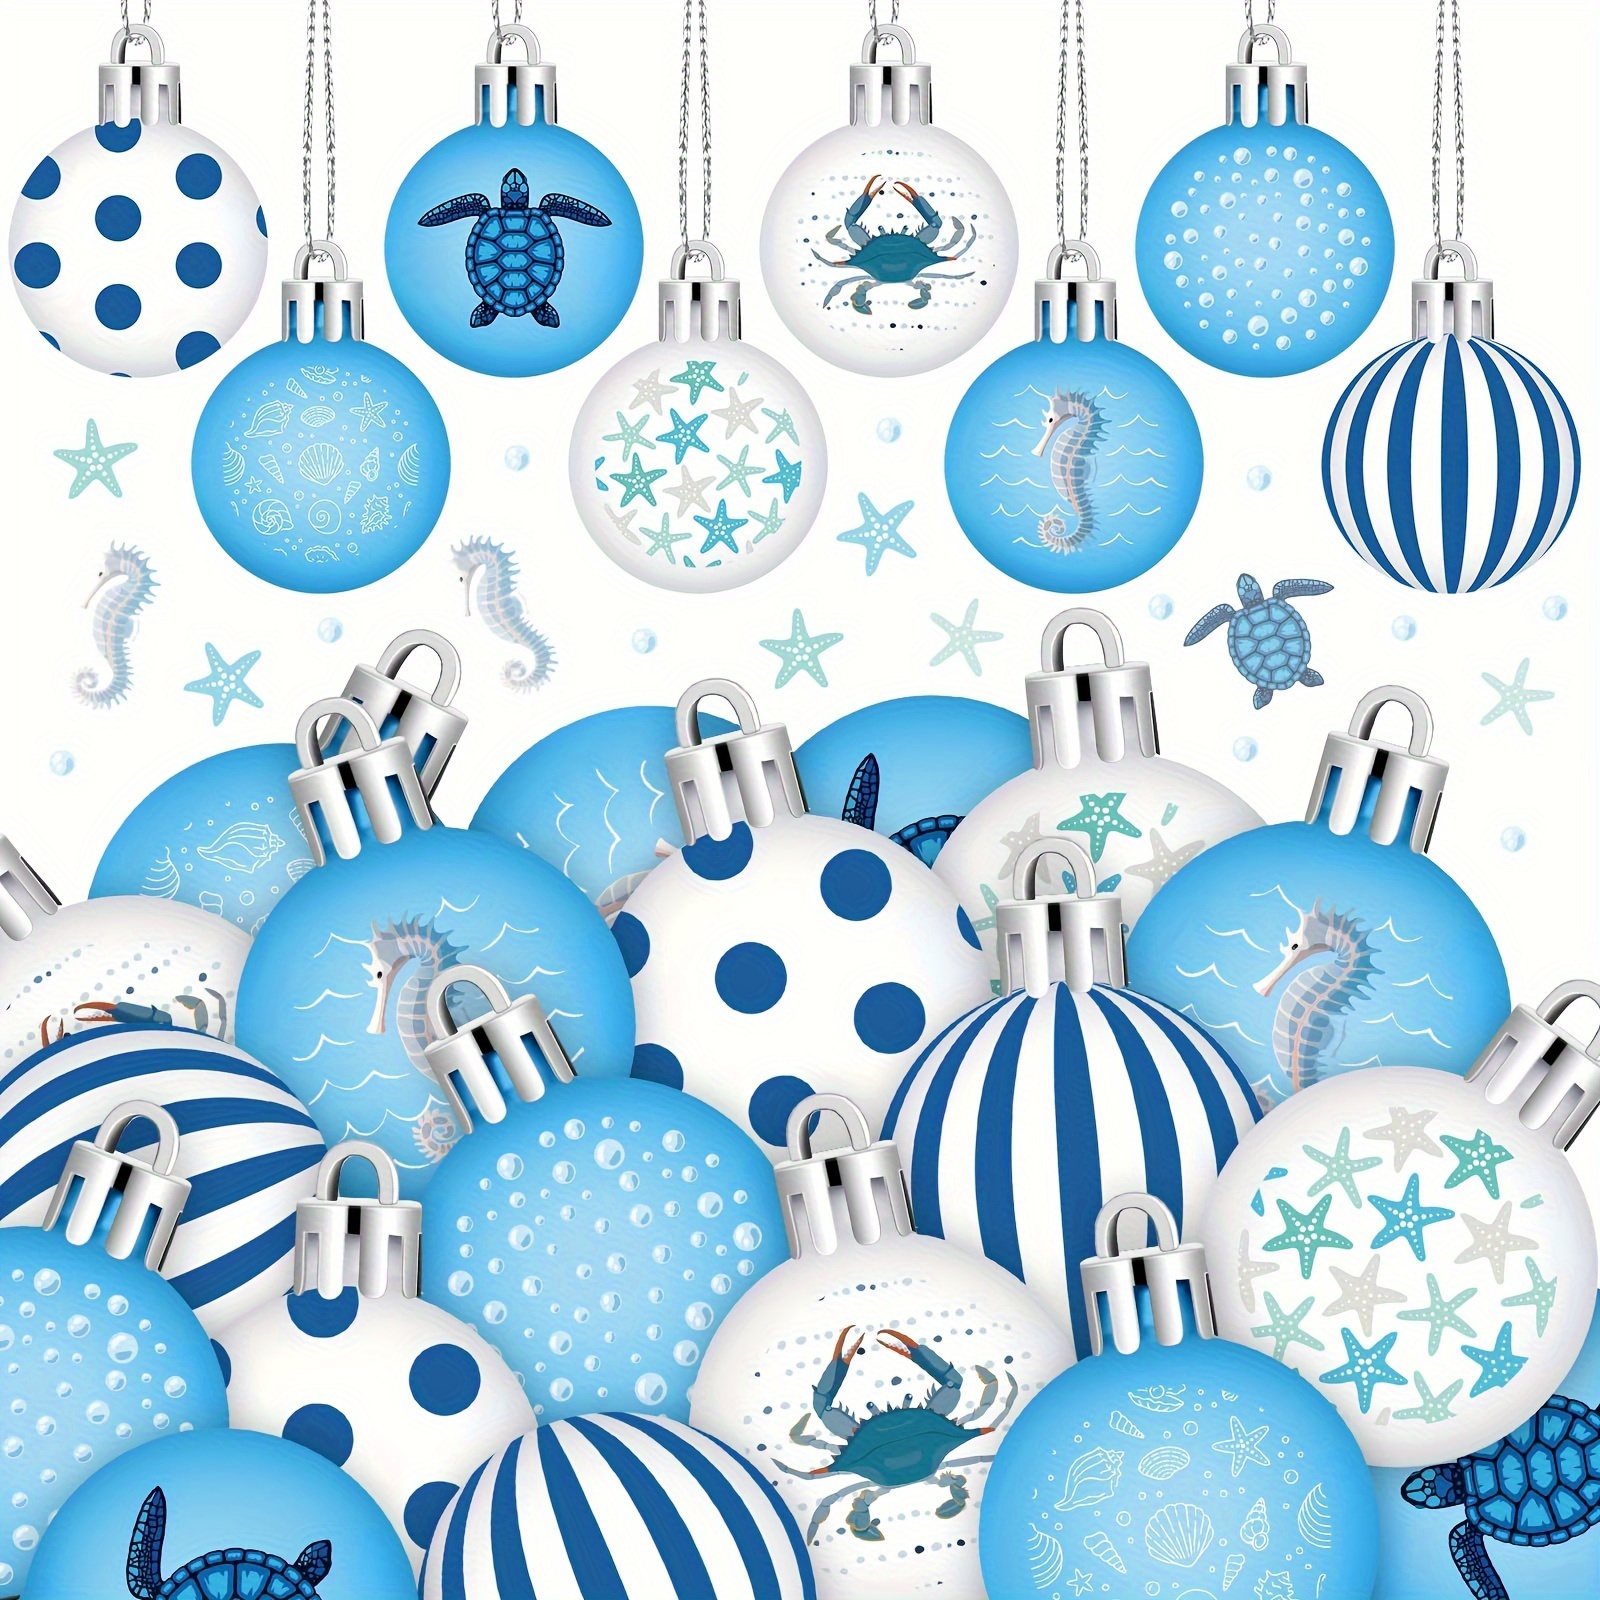 

24pcs Summer Ocean Balls Ornaments Blue Decorations For Tree Summer Glitter Hanging Ornaments Decor Balls For Summer Under The Sea Birthday Party